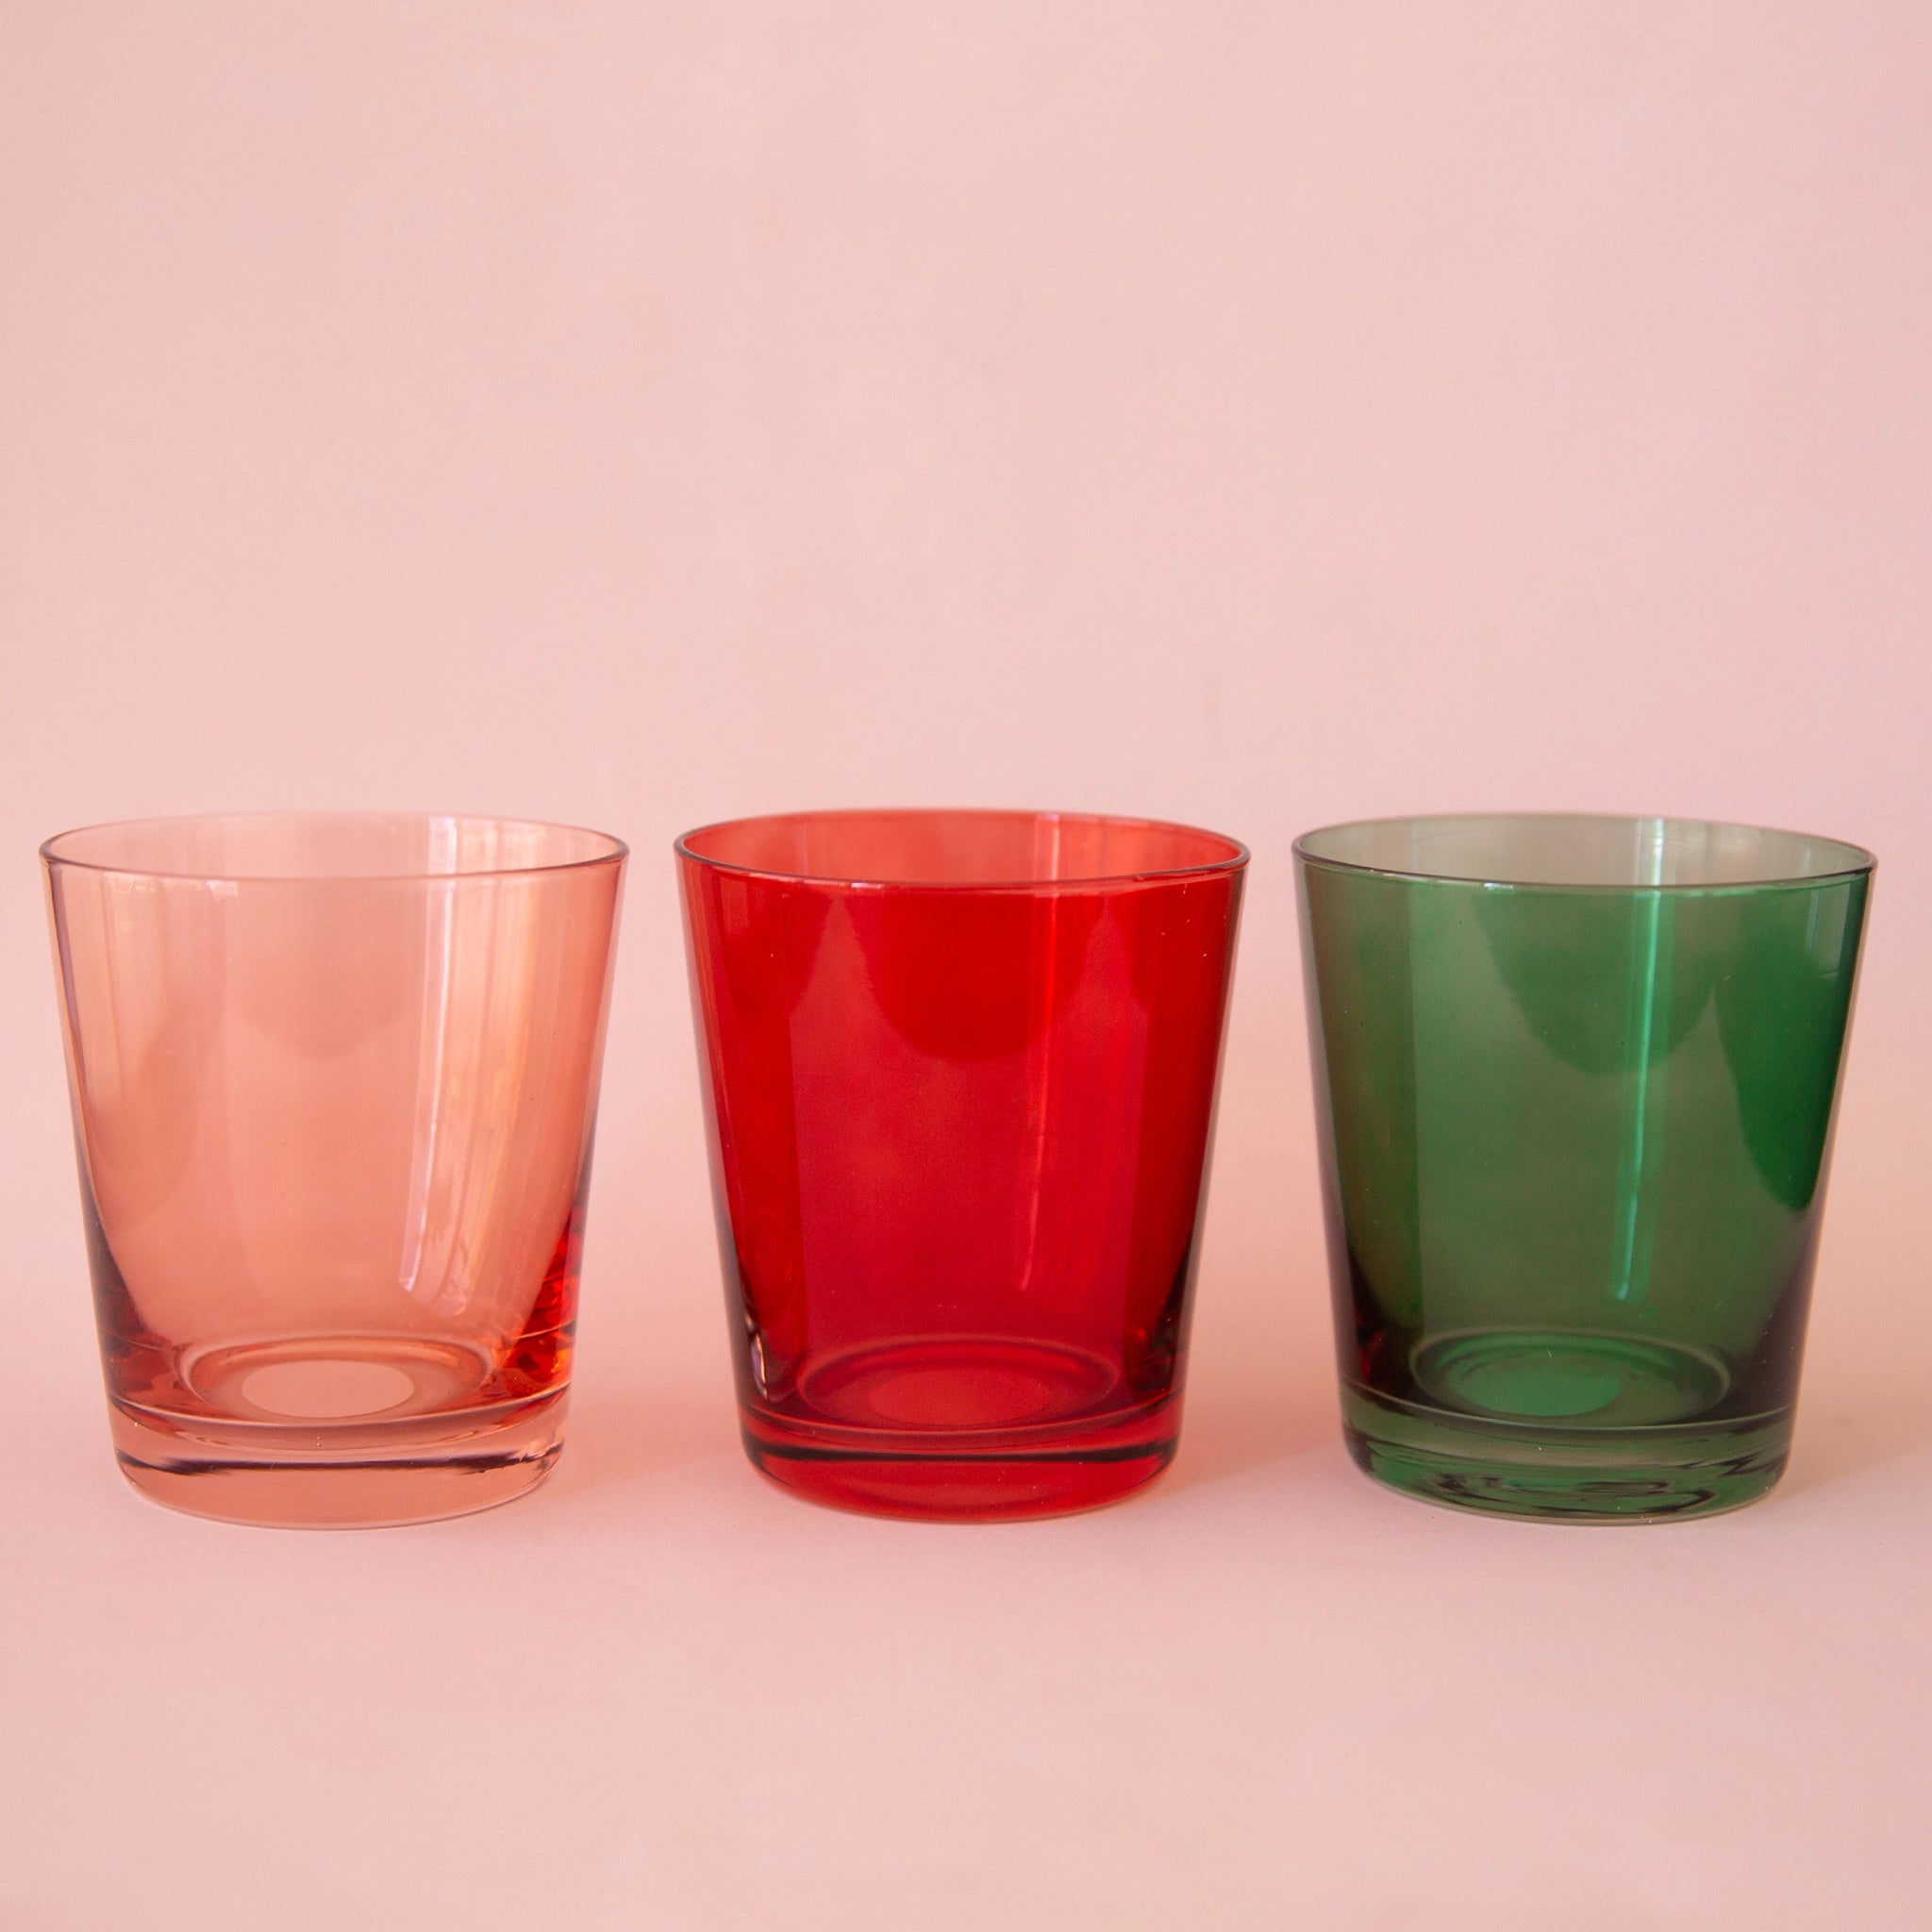 Three lowball drinking glasses featuring the other three color options for this glass. There is a pink, red and green option.